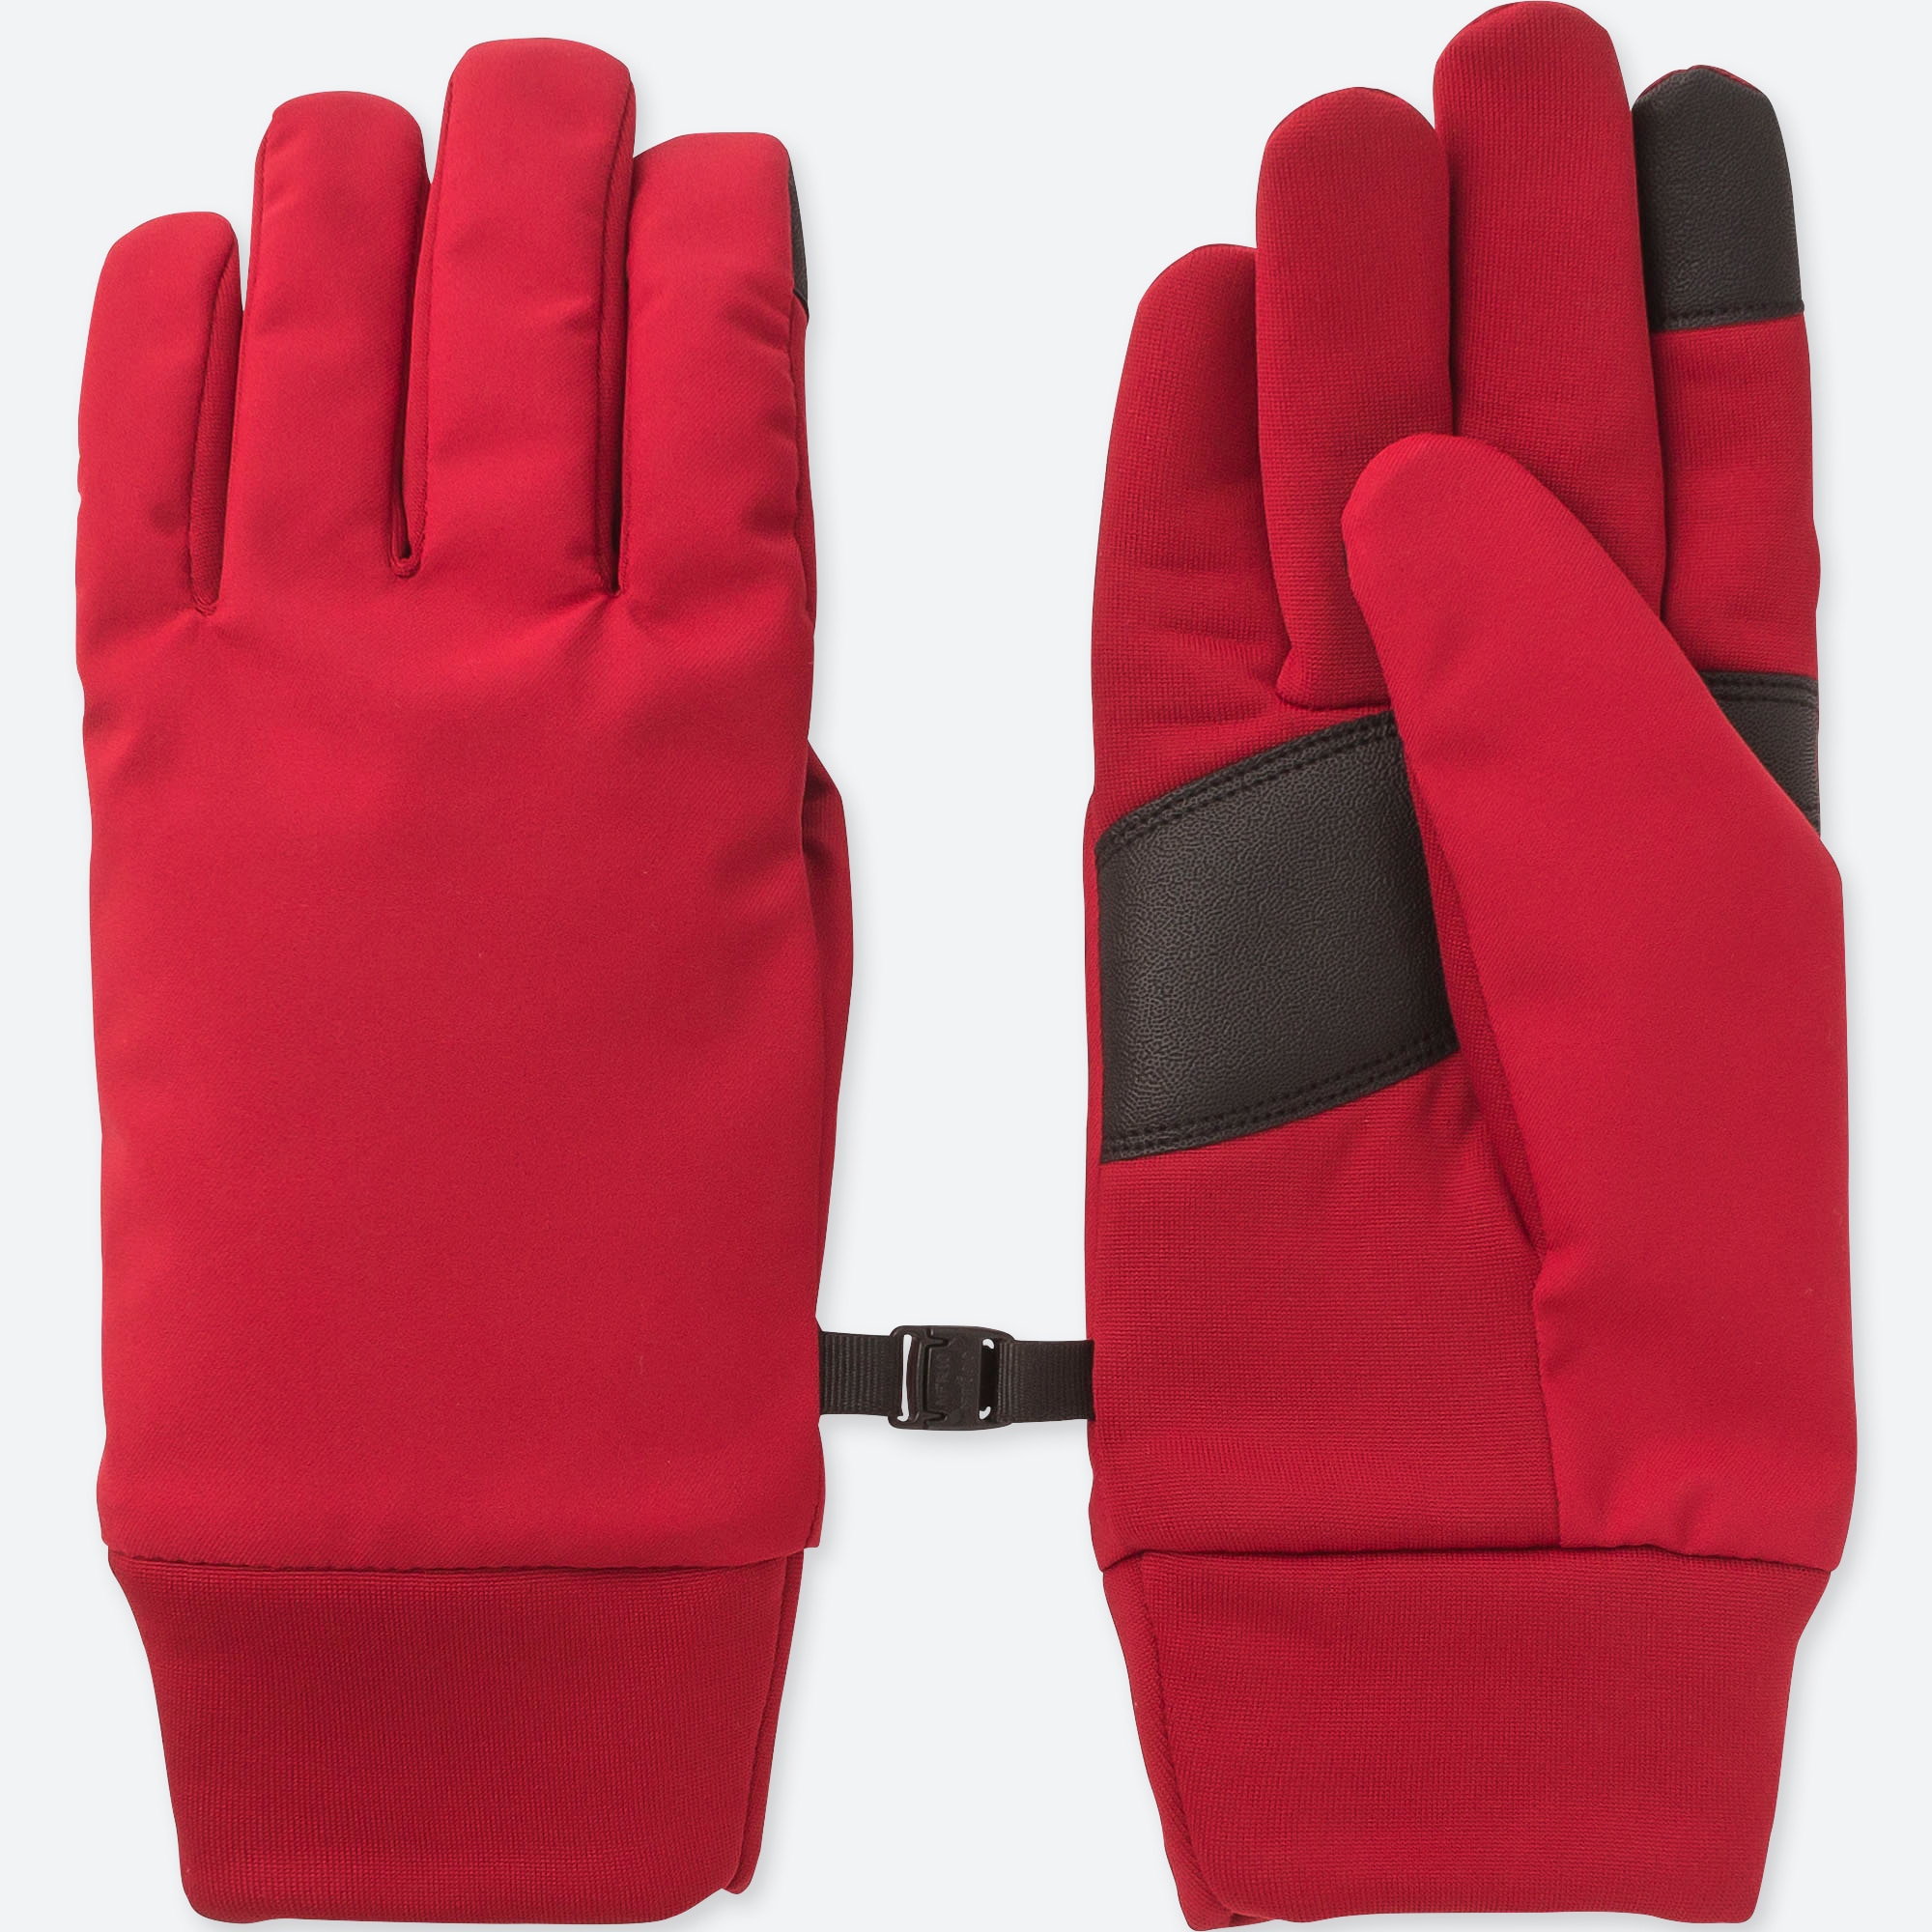 function of gloves